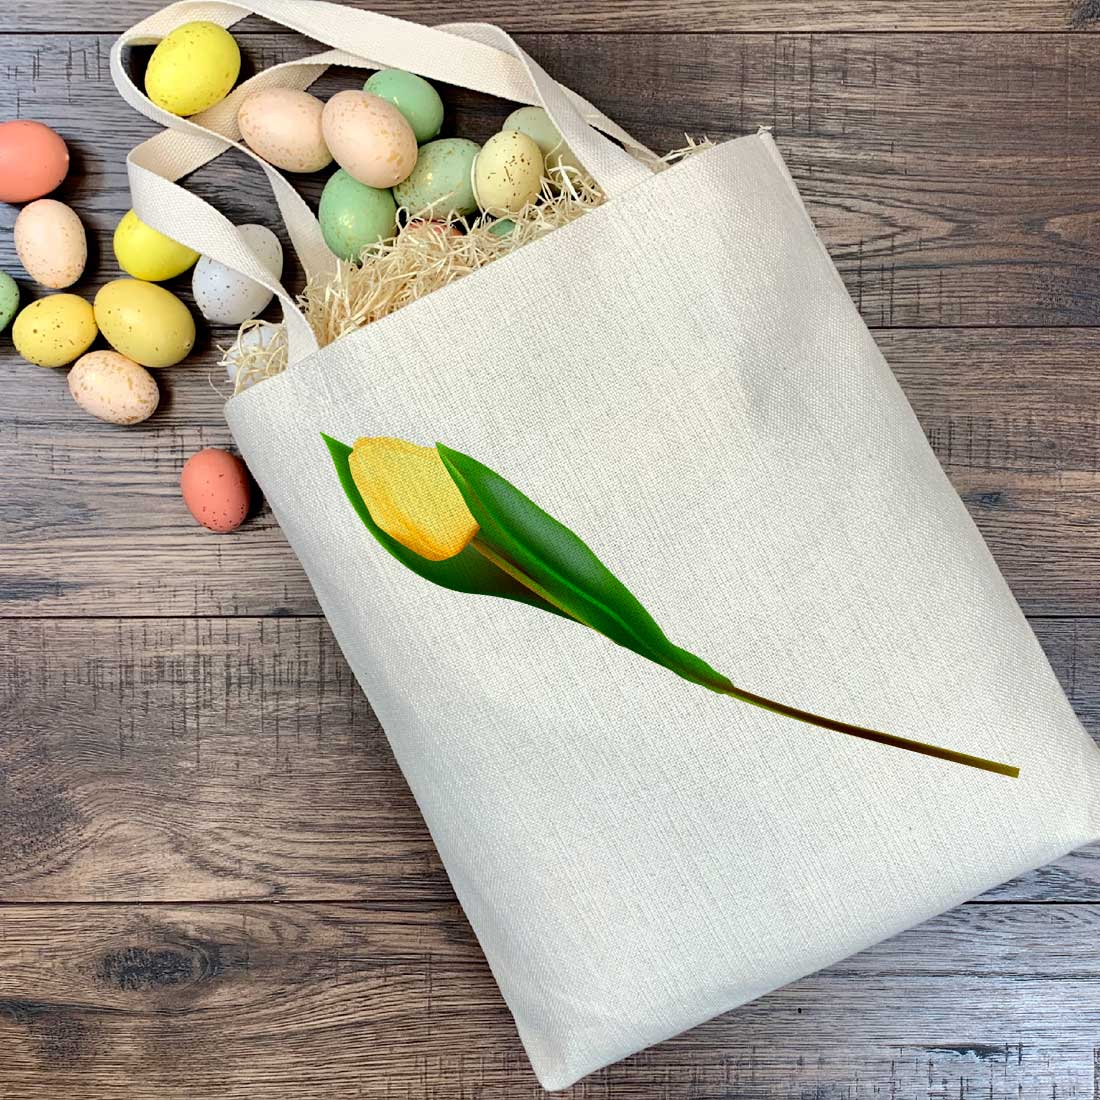 White bag with a yellow flower and eggs.